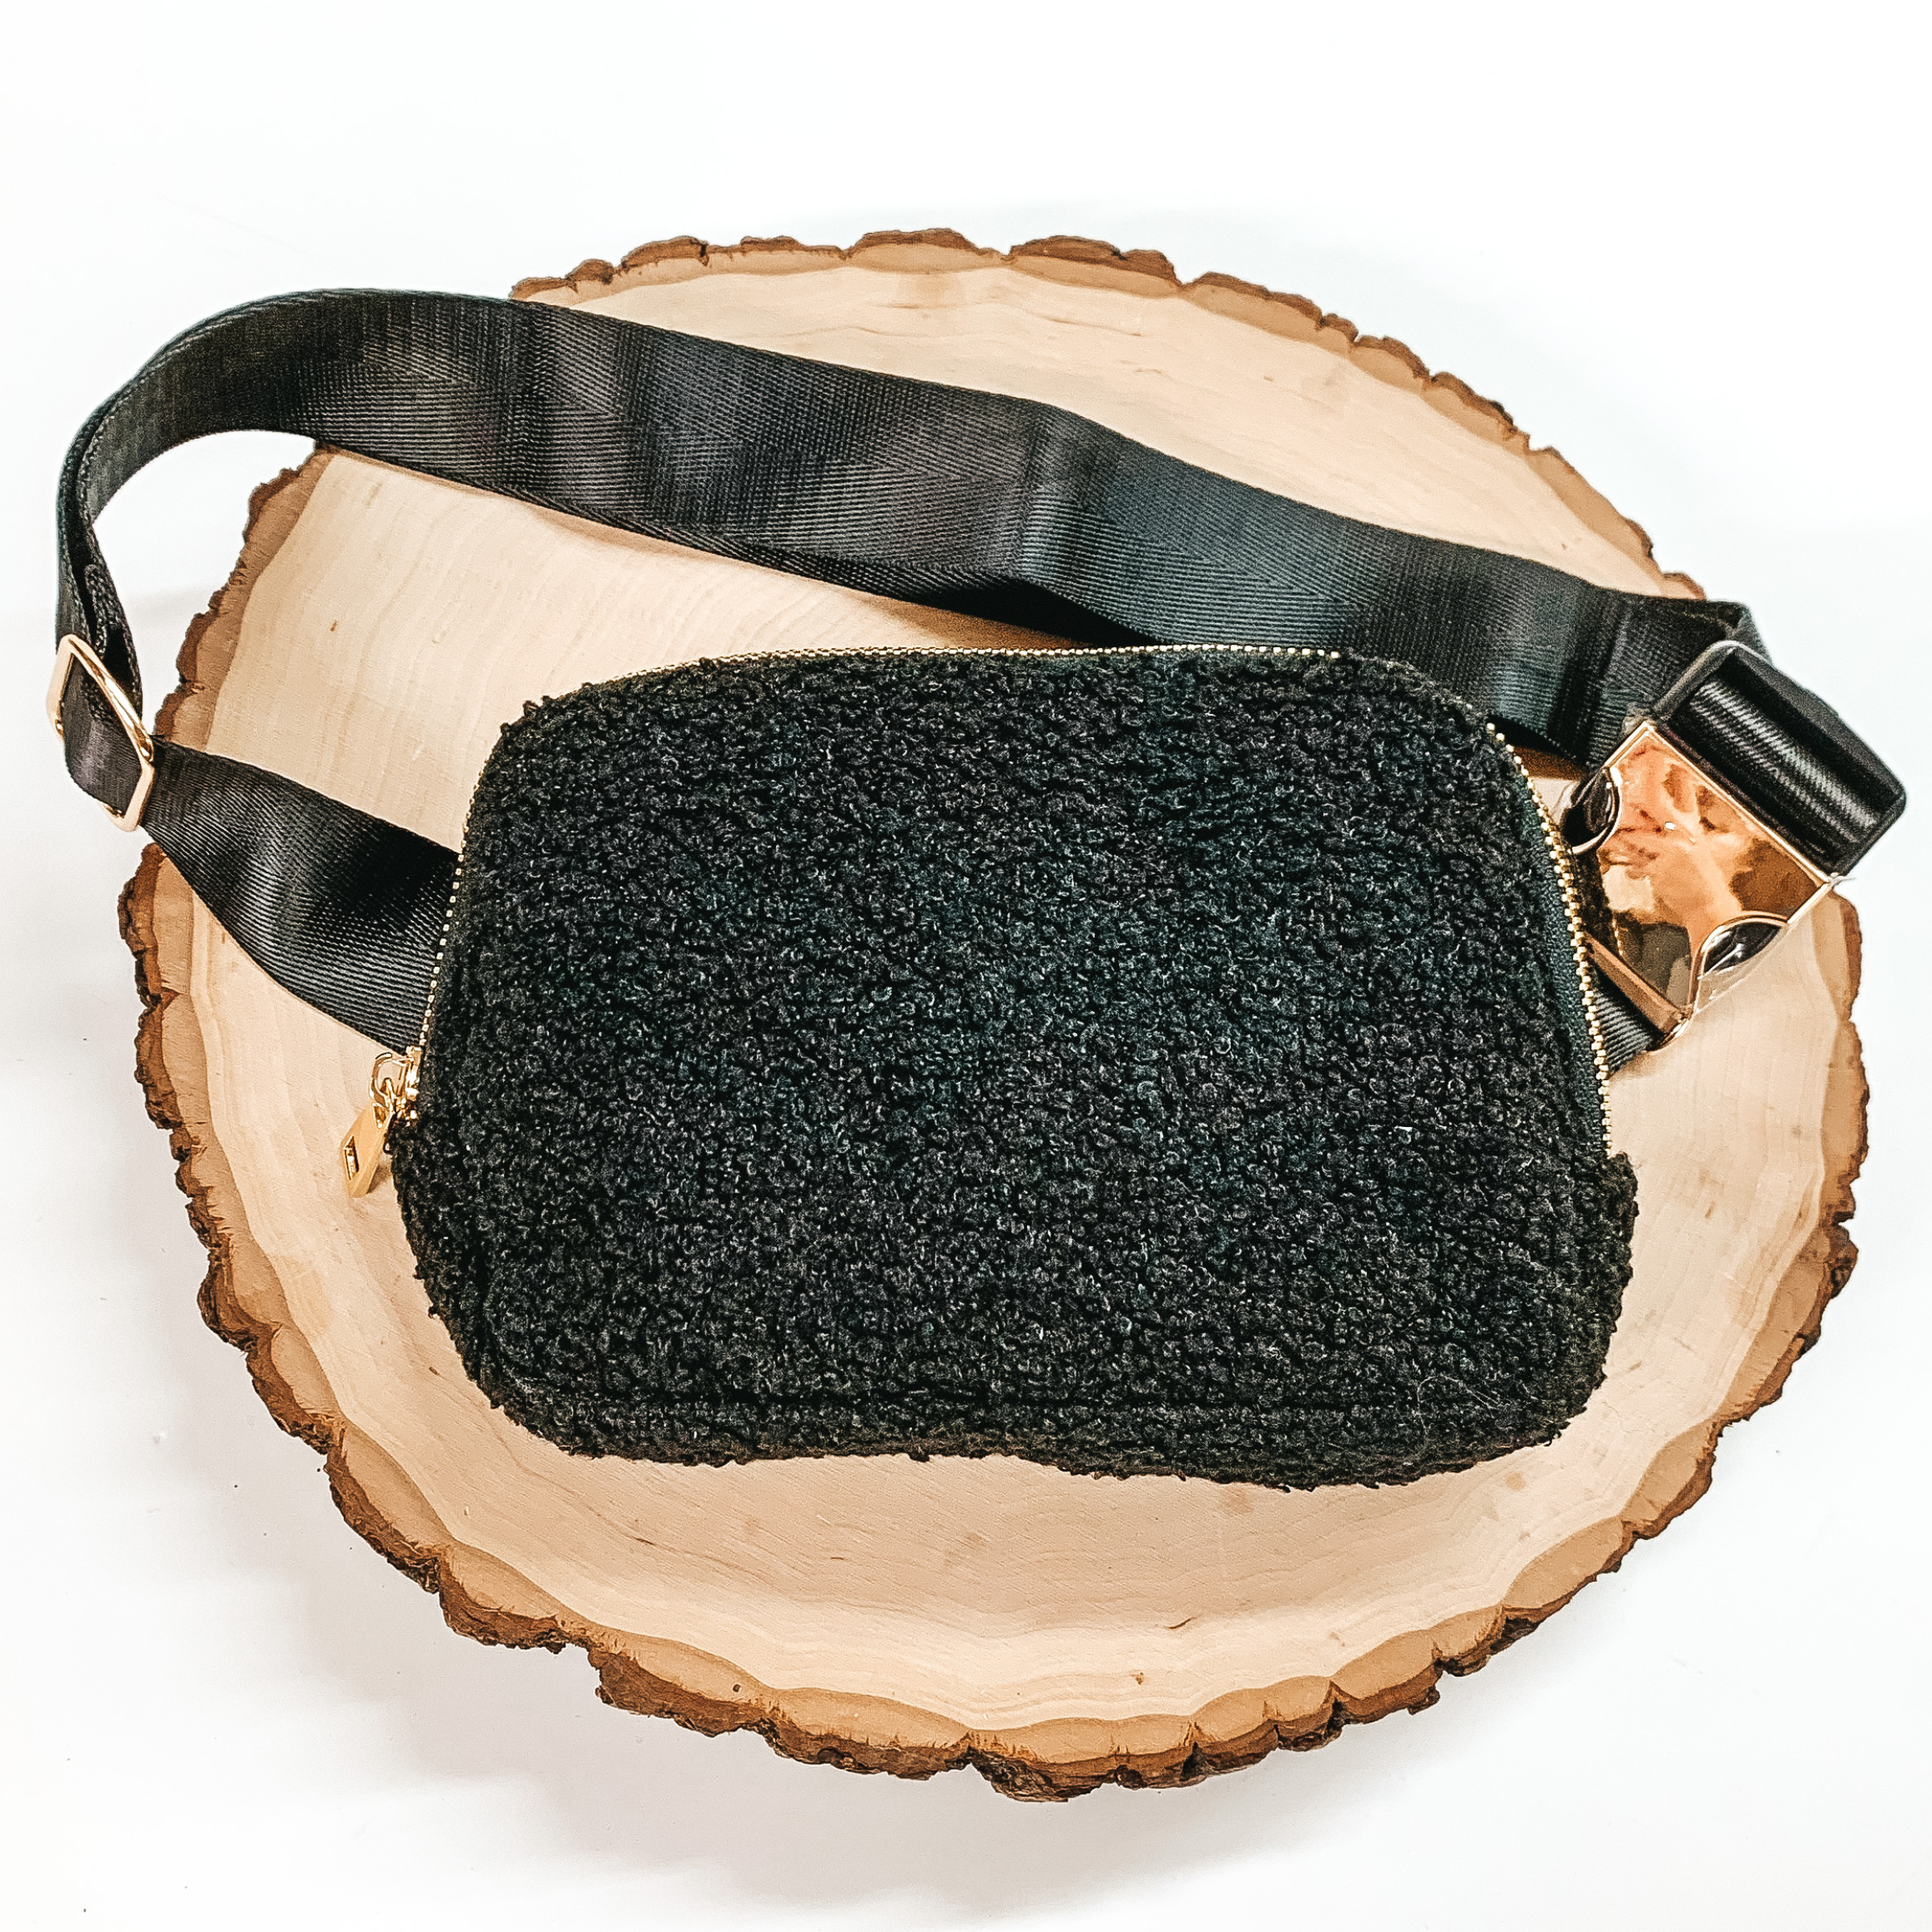 Black, sherpa fanny pack with a top zipper across the front. This fanny pack also includes black straps and gold clips. This fanny pack is pictured on a piece of wood on a white background. 